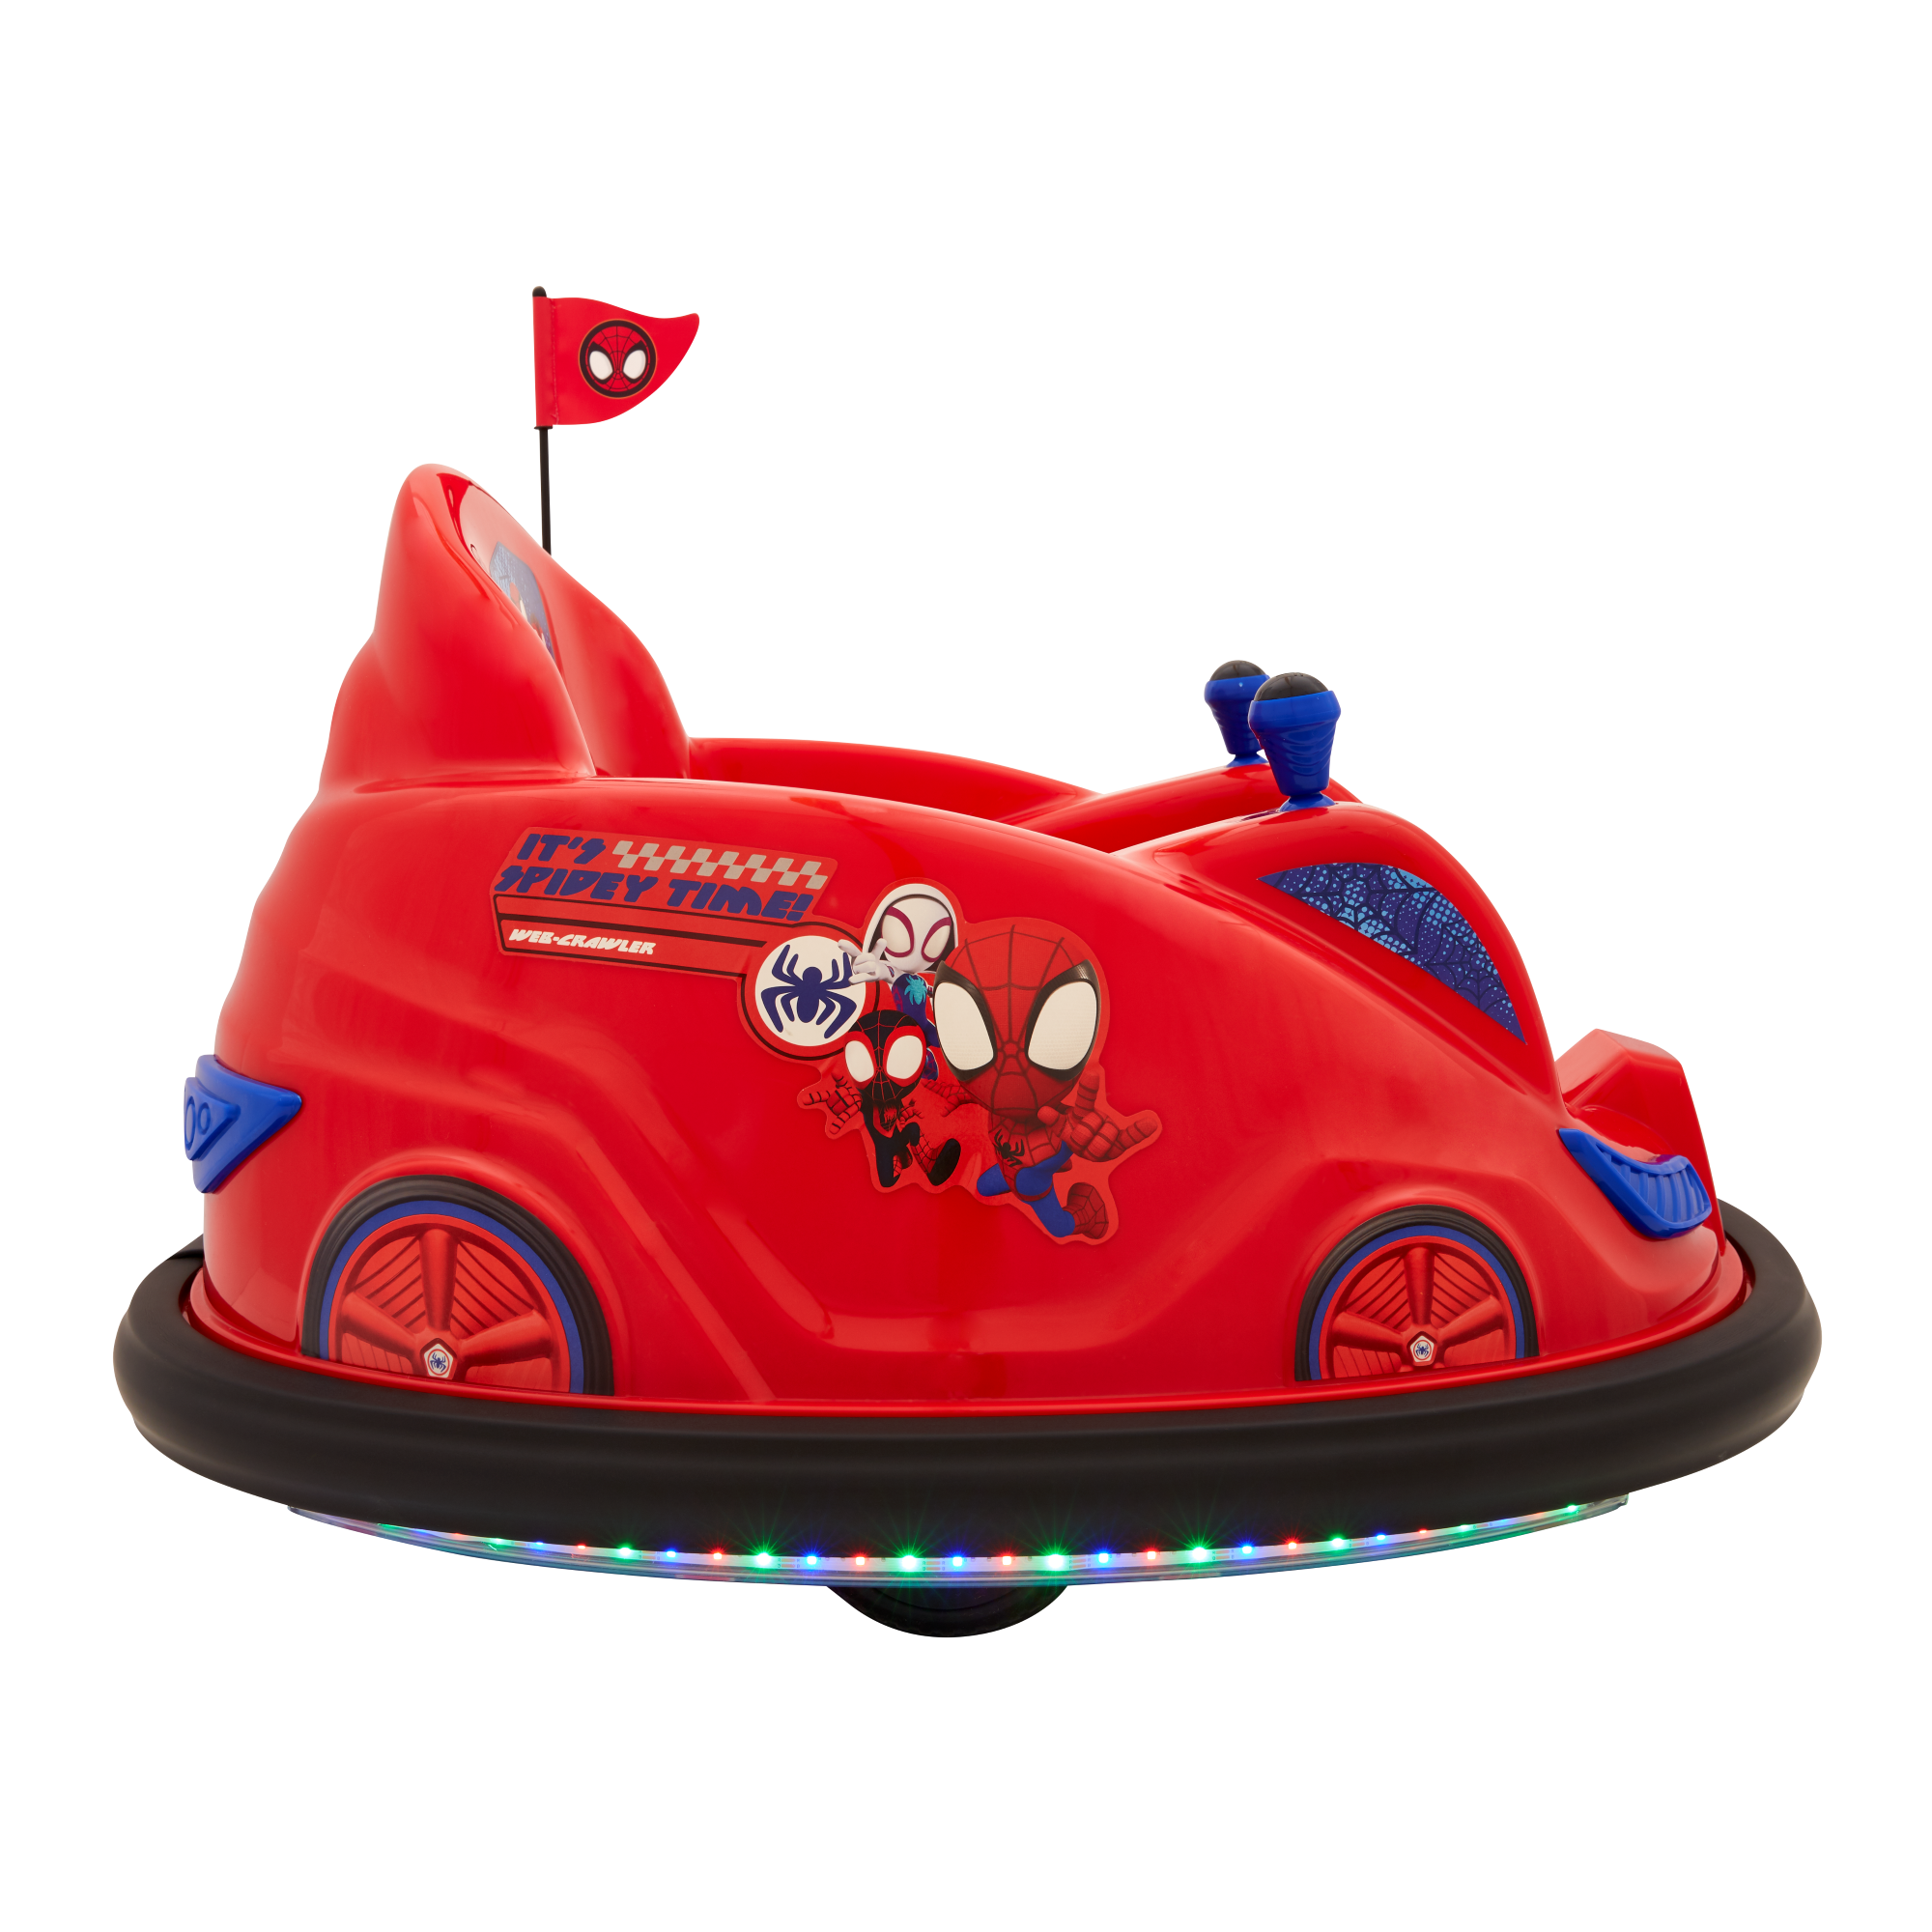 Spidey and His Amazing Friends, 6 Volts Bumper Car, Battery Powered Ride on, Fun LED Lights Includes, Charger, Ages 1.5- 4 Years, Unisex - image 10 of 14